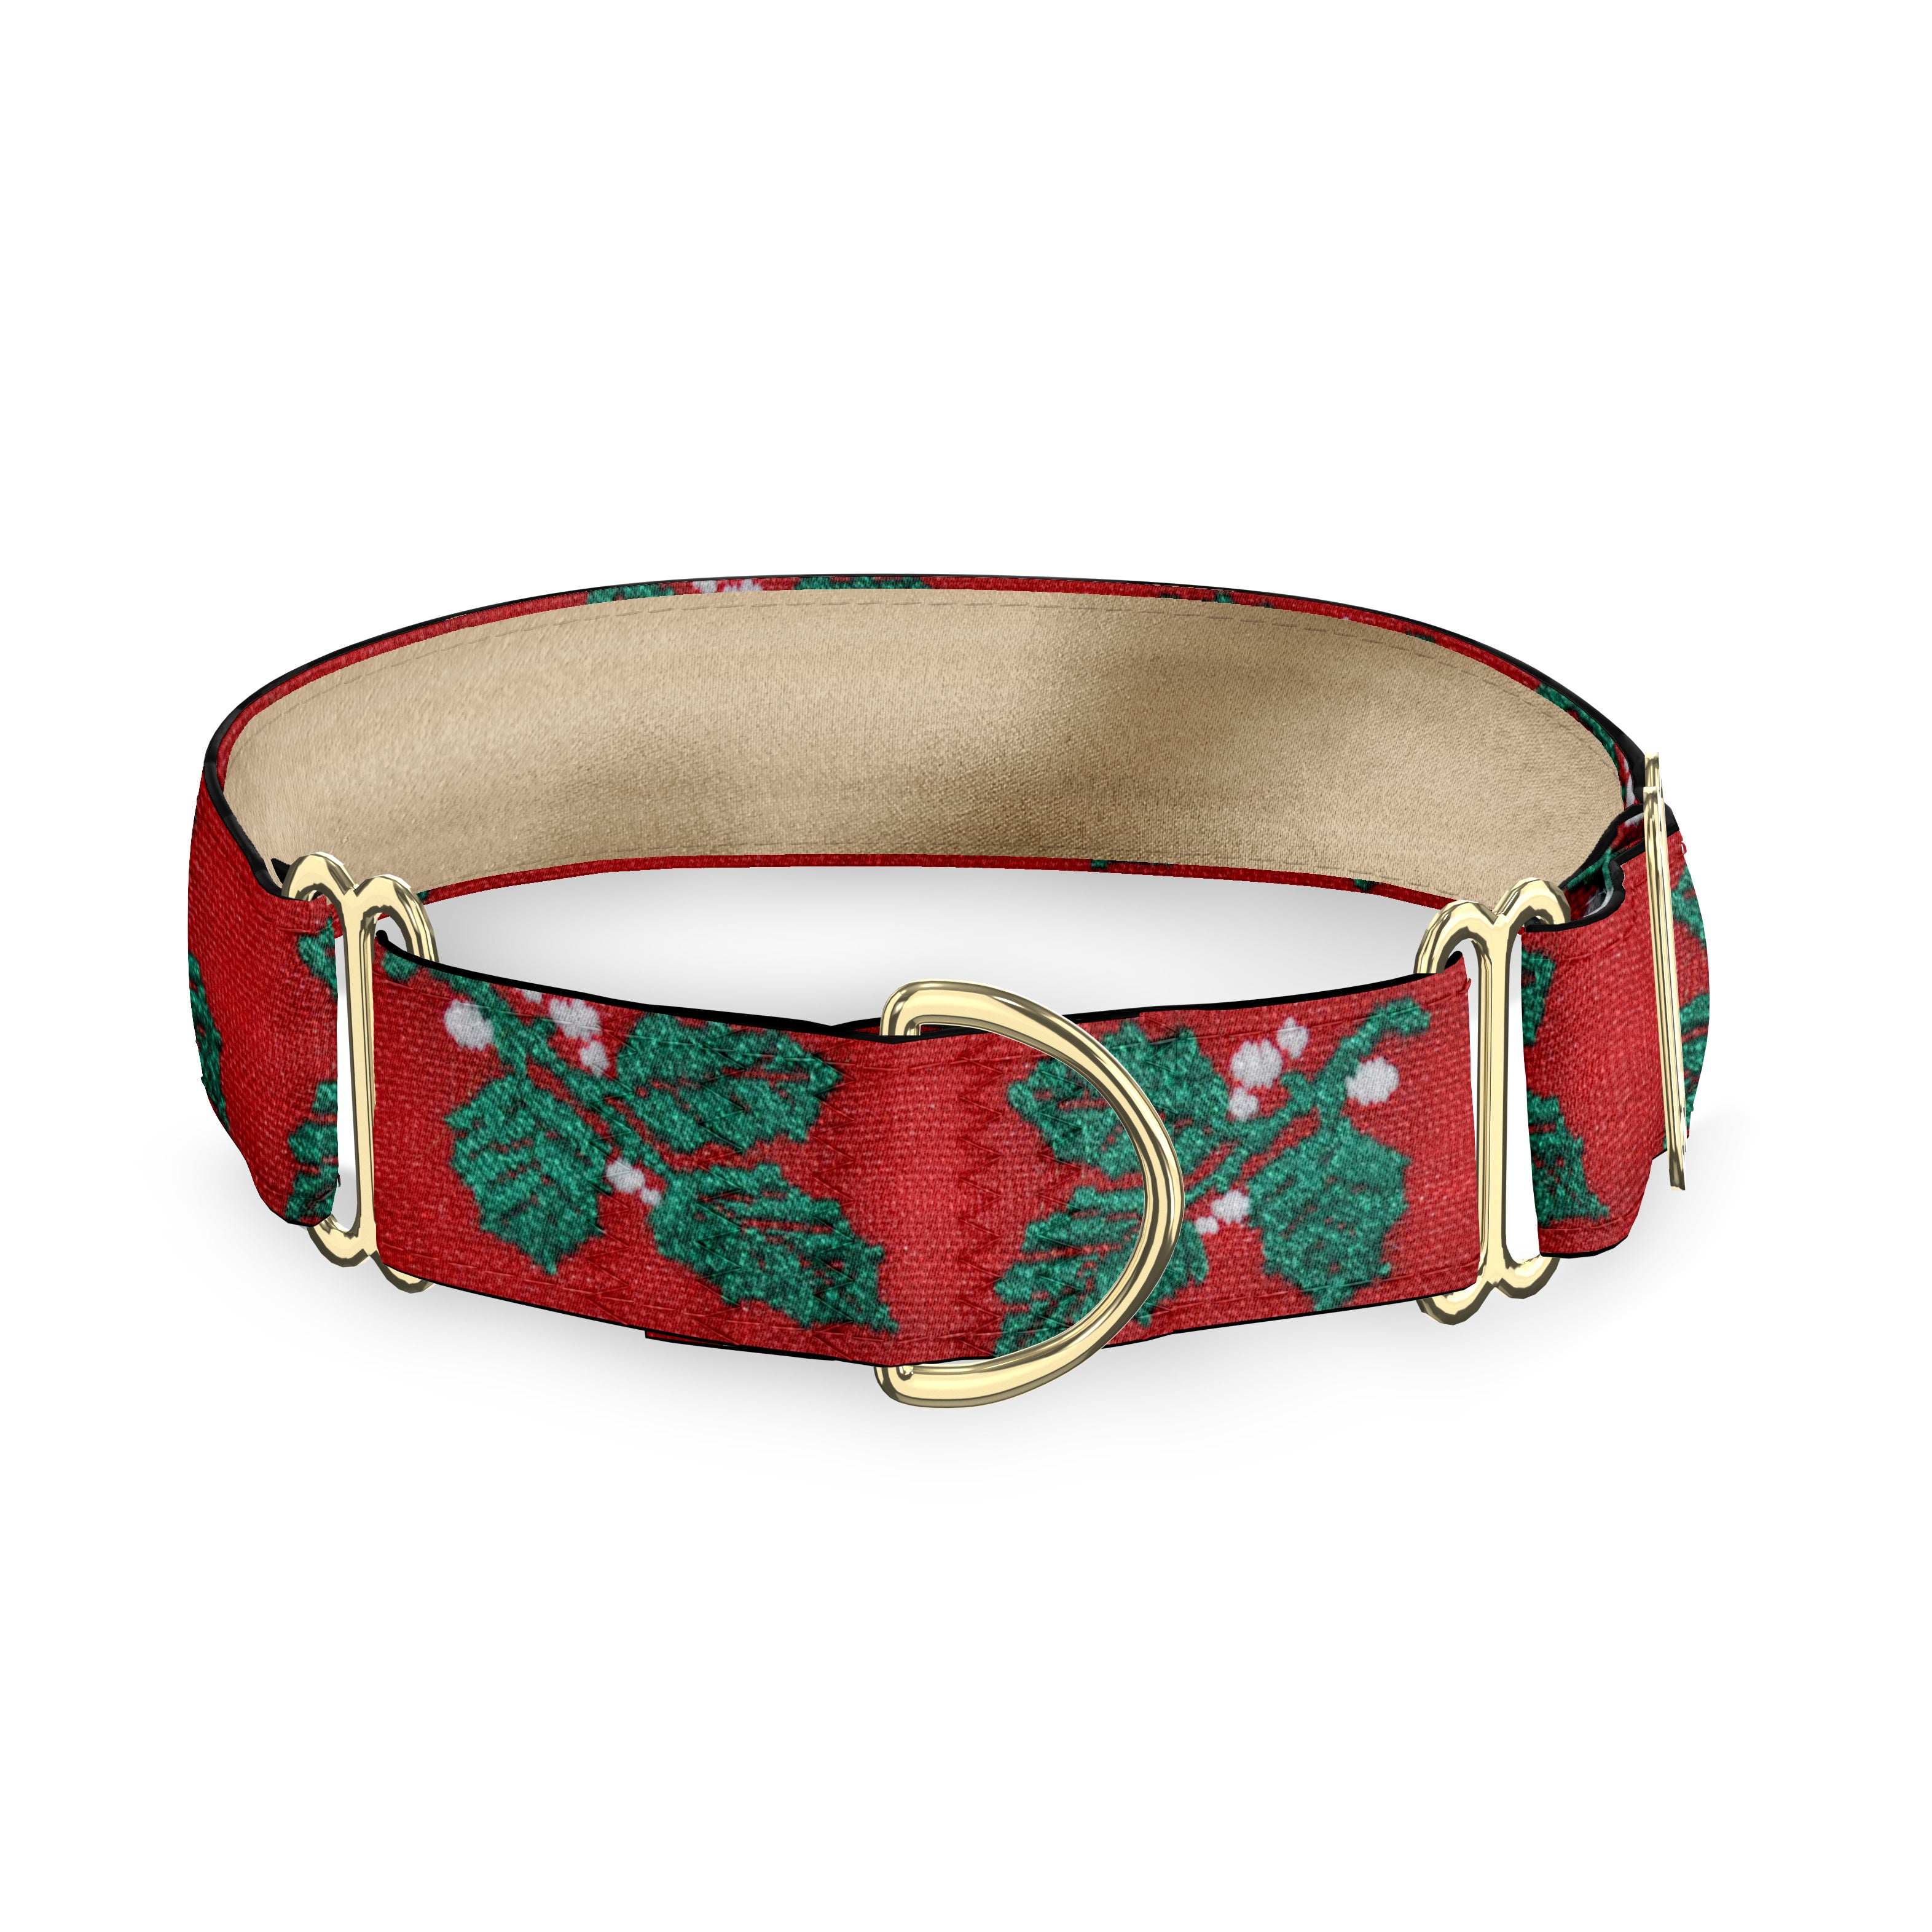 Signature Red Green Gucci Inspired Dog Collar and Leash Set